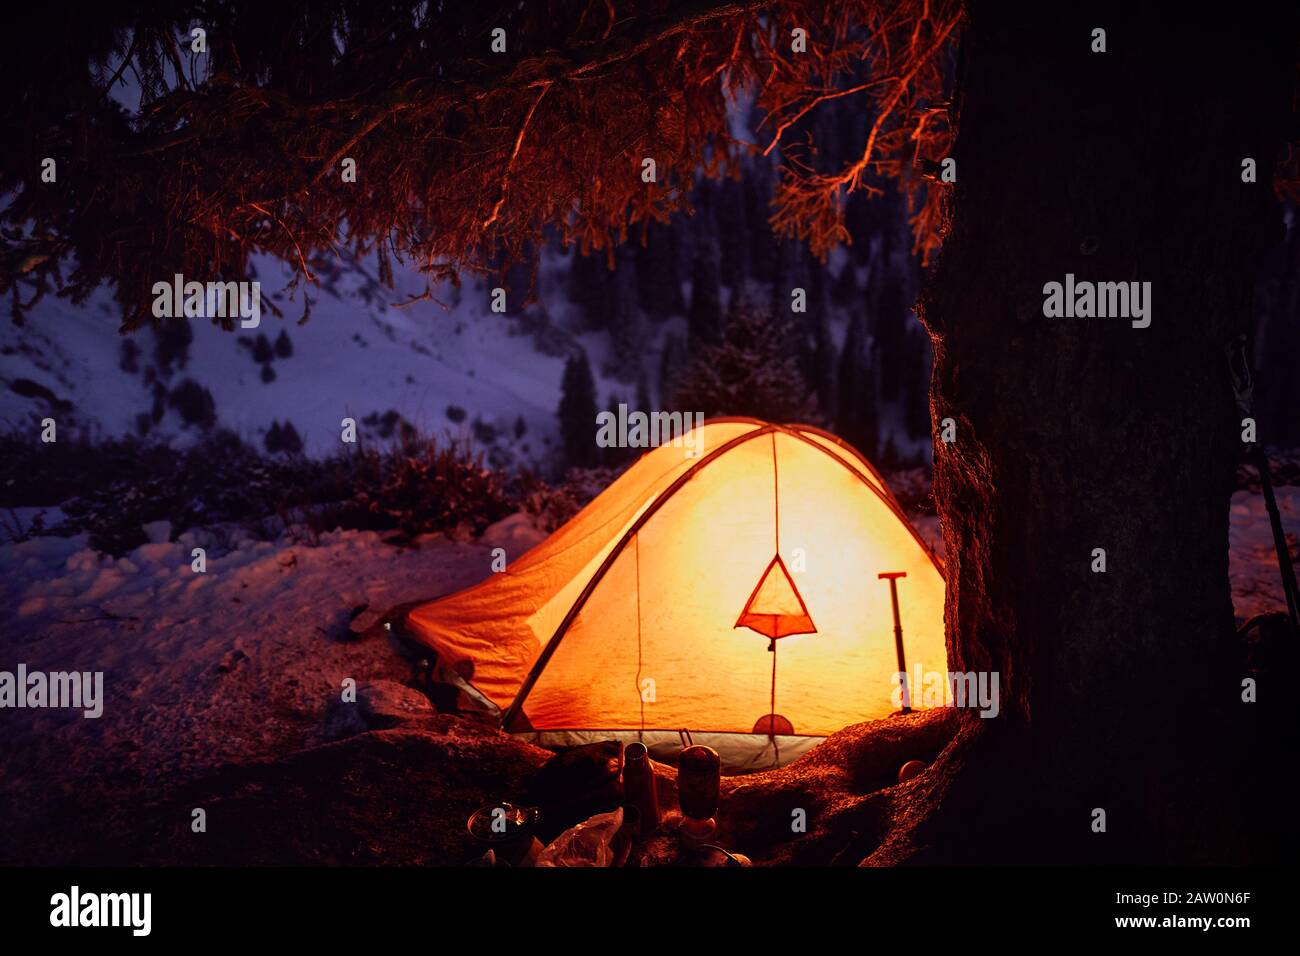 Camp with orange glowing tents near big spruce in the mountains under purple winter night sky. Stock Photo